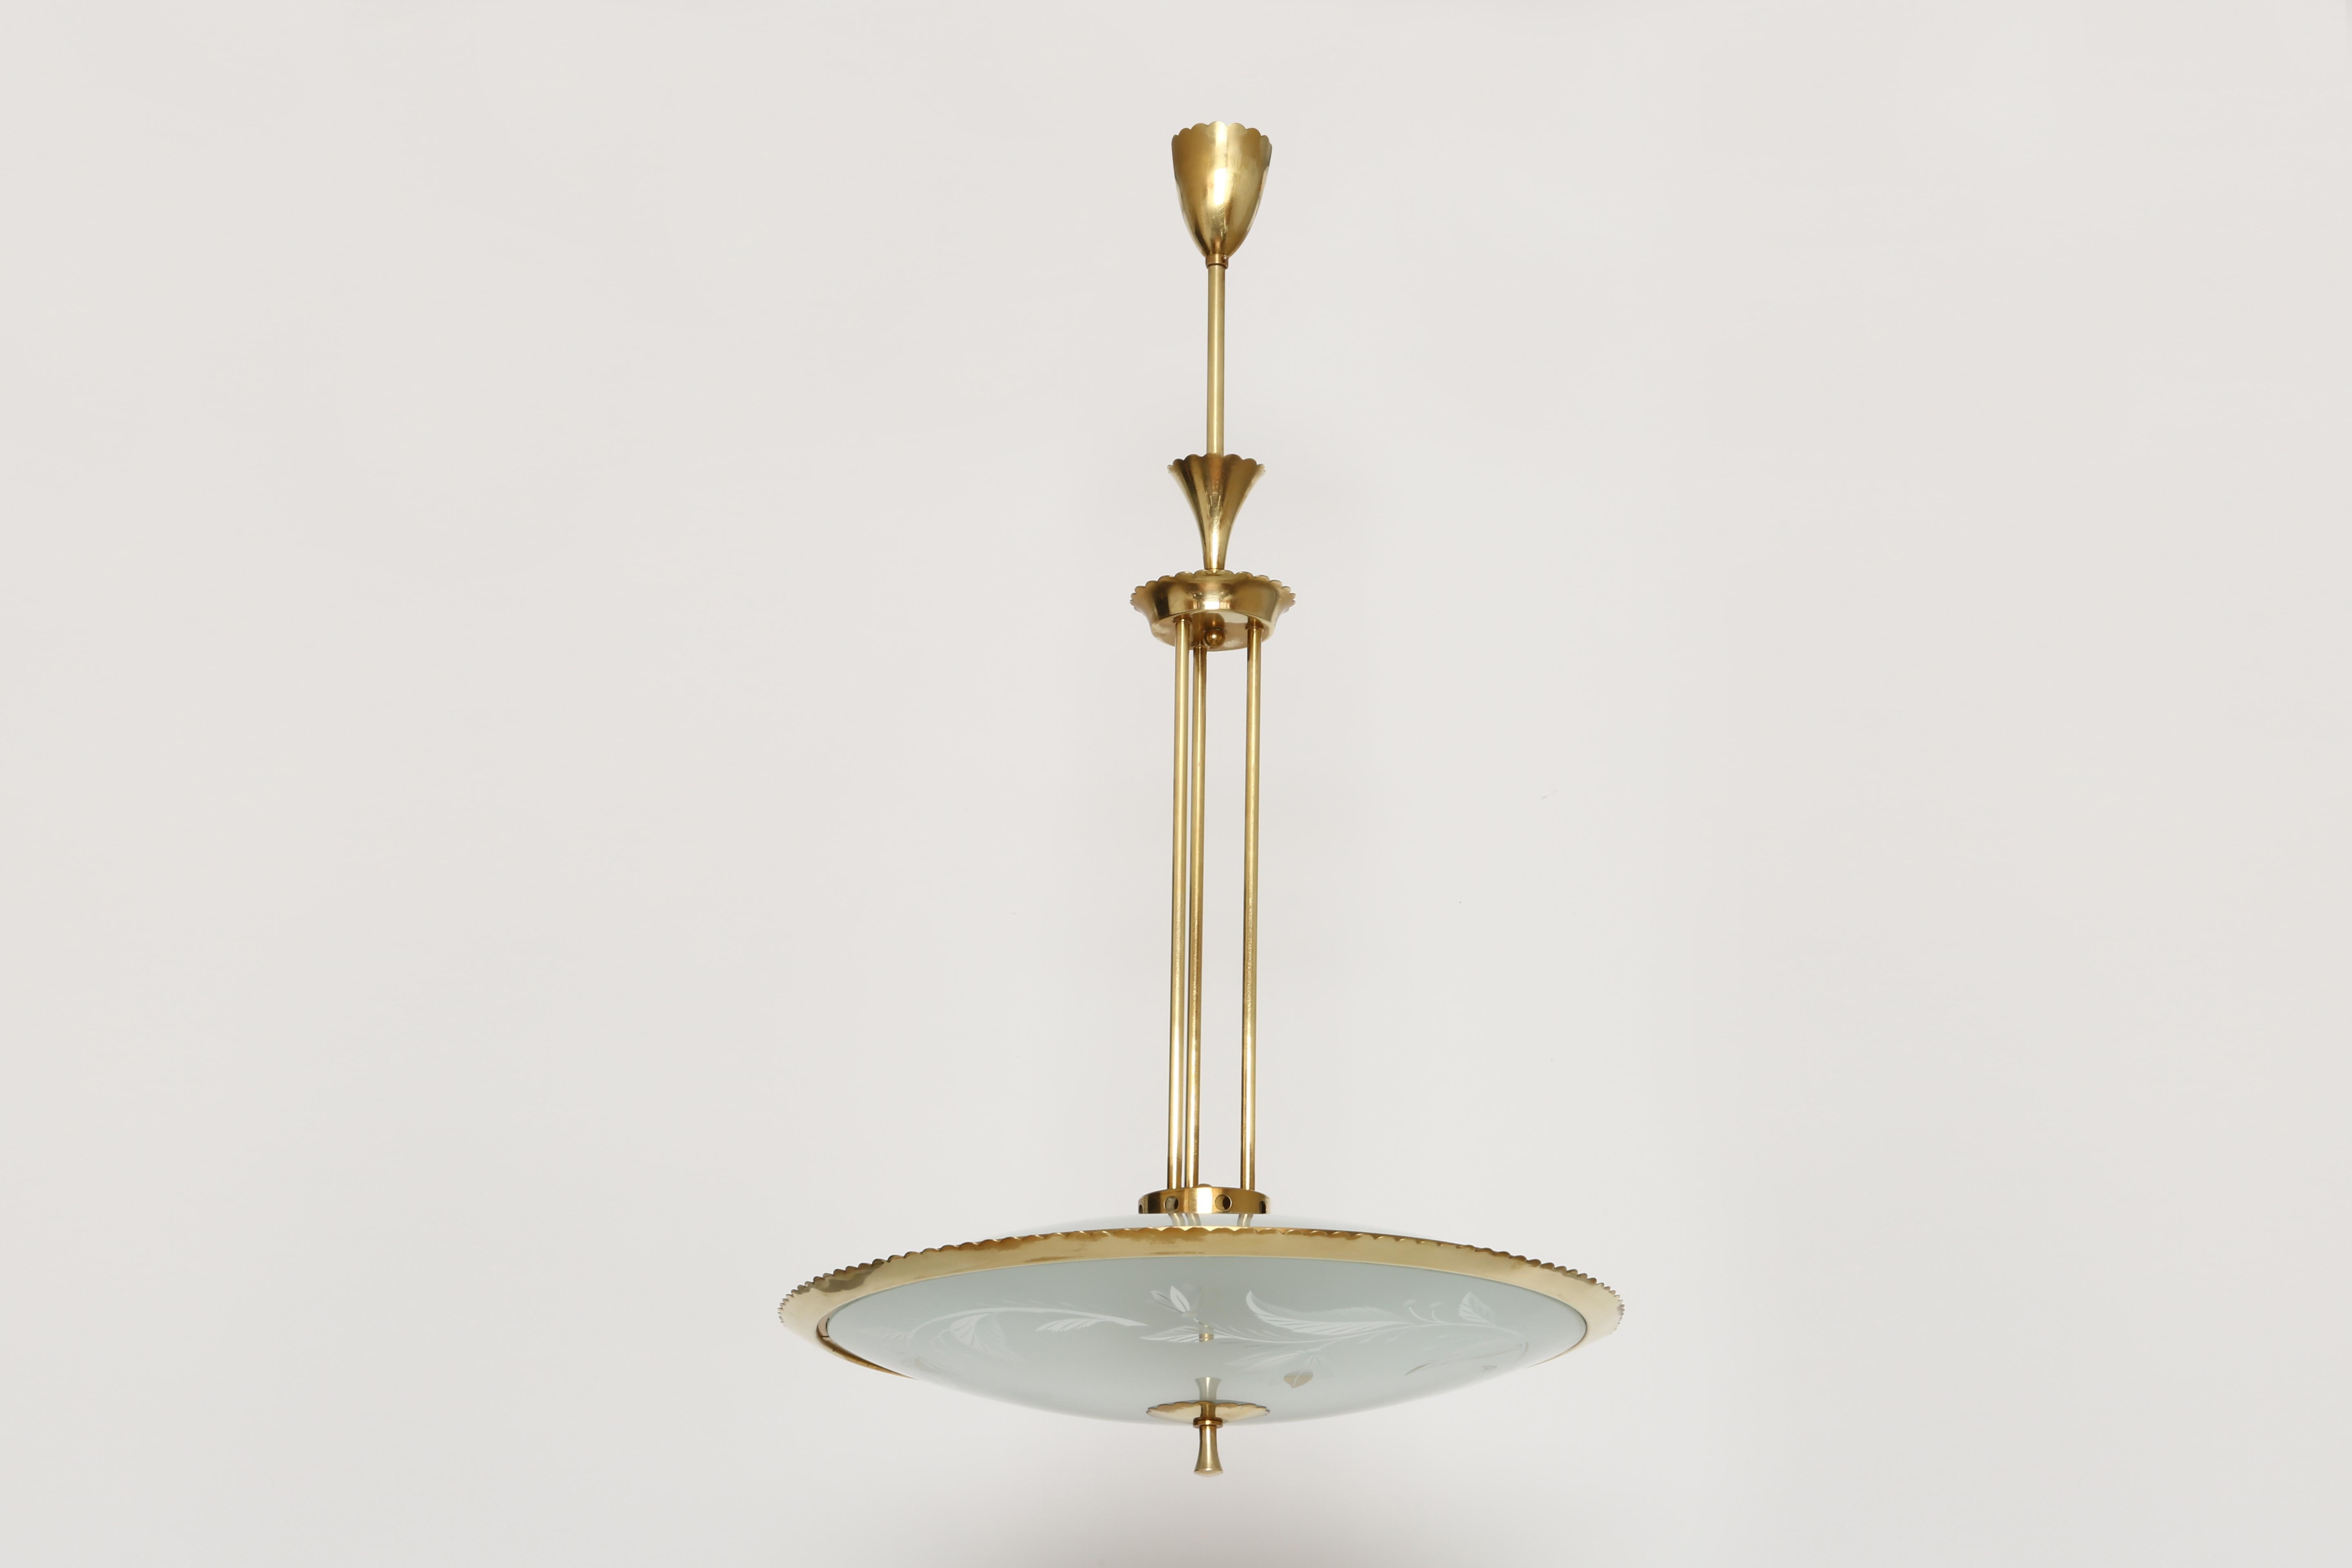 Pietro Chiesa for Fontana Arte style ceiling pendant attributed.
Designed and made in Italy in 1960s.
Glass, brass.
Takes 3 candelabra bulbs. 
Complimentary US rewiring upon request.
Overall drop is adjustable. Can be shorter.

We take pride in